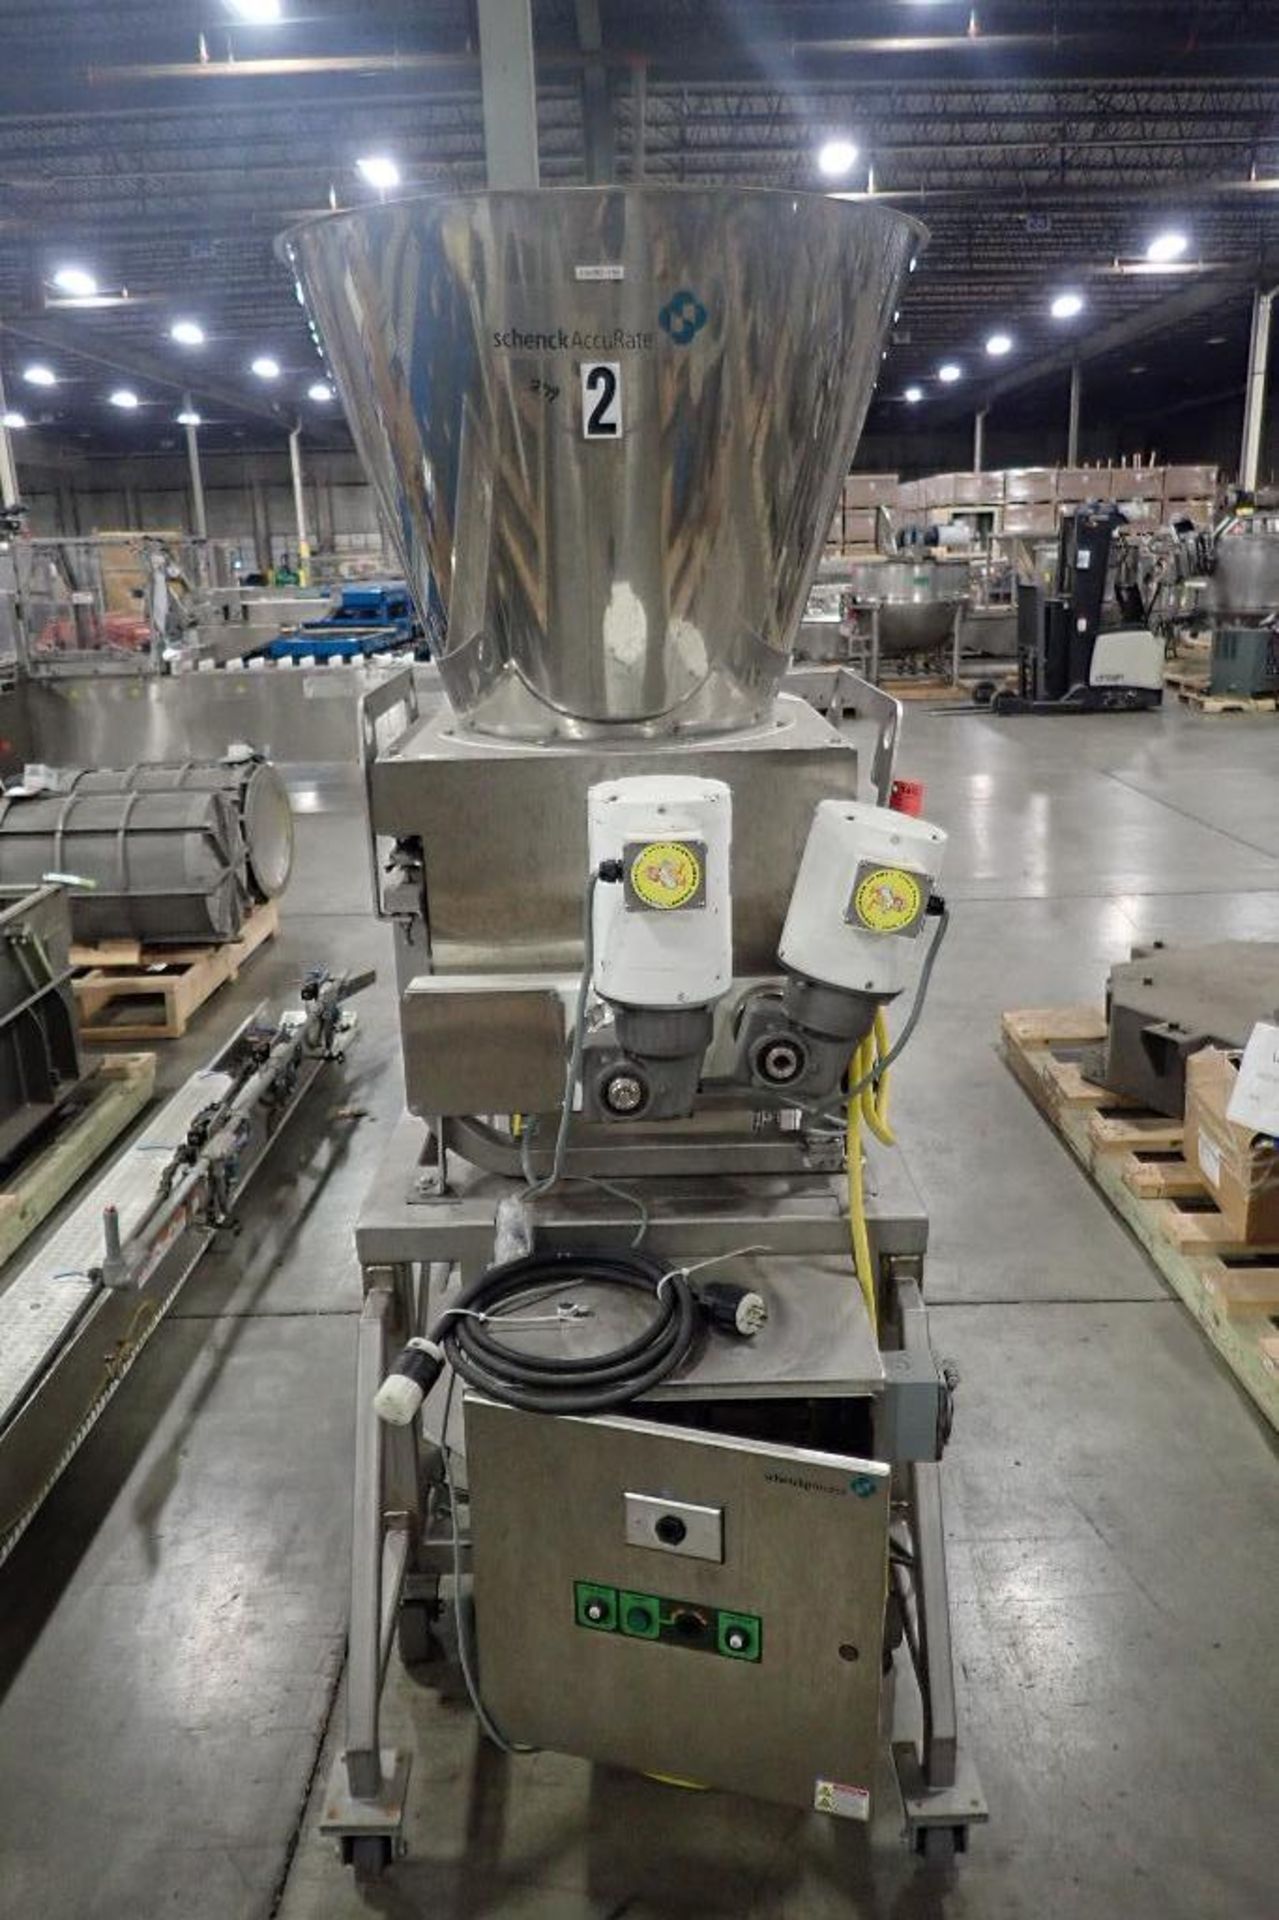 2009 Schenck Accurate SS ingredient feeder, Type MODMG-SC-2A, SN 134382-18A-MECCM, on load cells, SS - Image 3 of 12